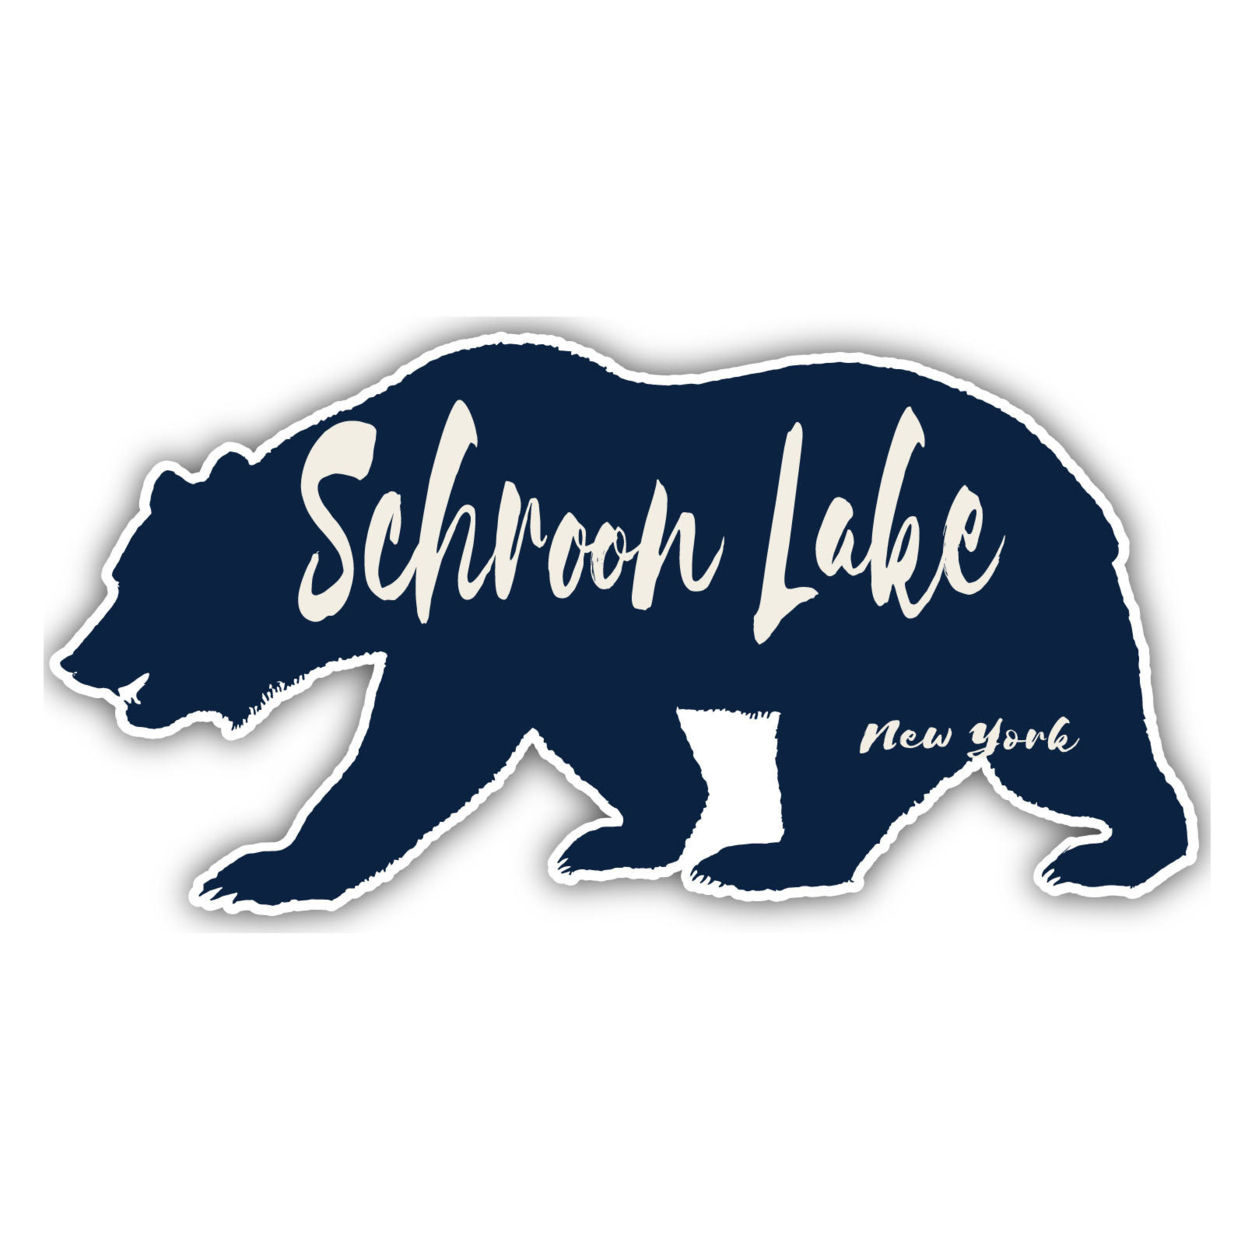 Schroon Lake New York Souvenir Decorative Stickers (Choose Theme And Size) - Single Unit, 4-Inch, Adventures Awaits